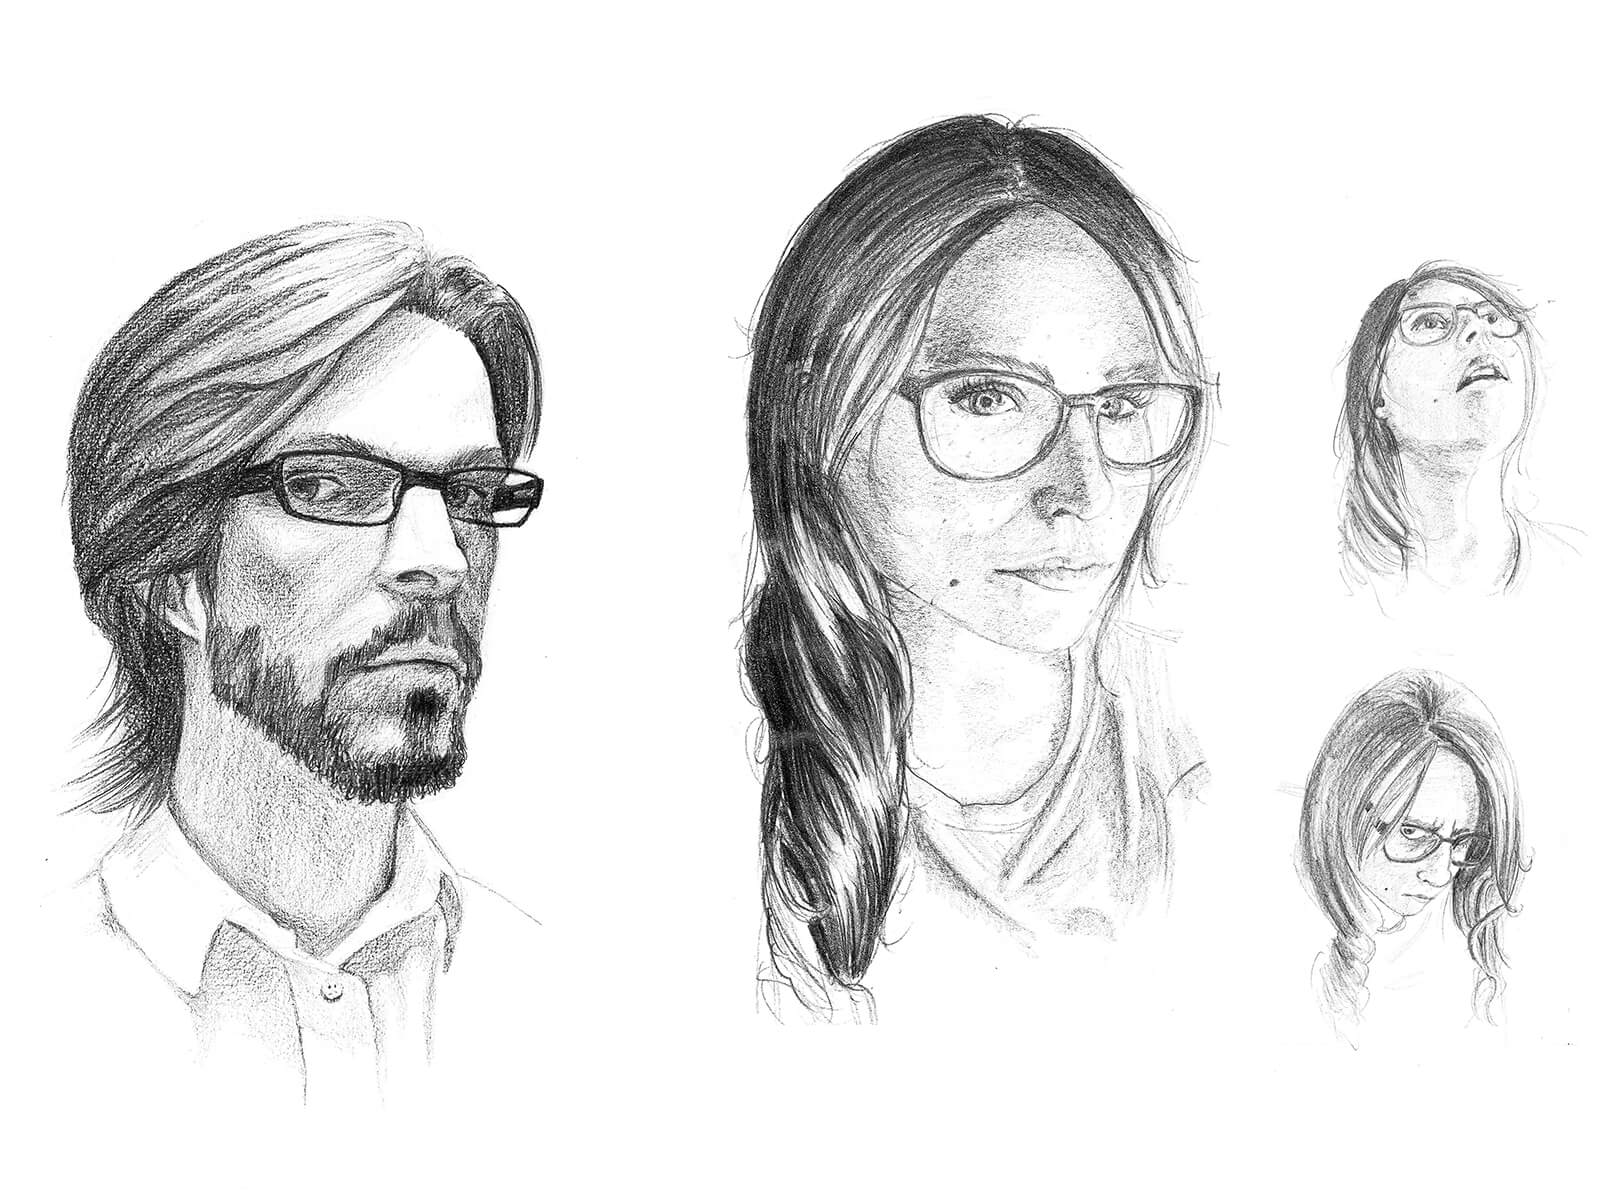 Black-and-white self portraits of a male and female artists&#039; faces. Each wear eyeglasses and the man has a beard.